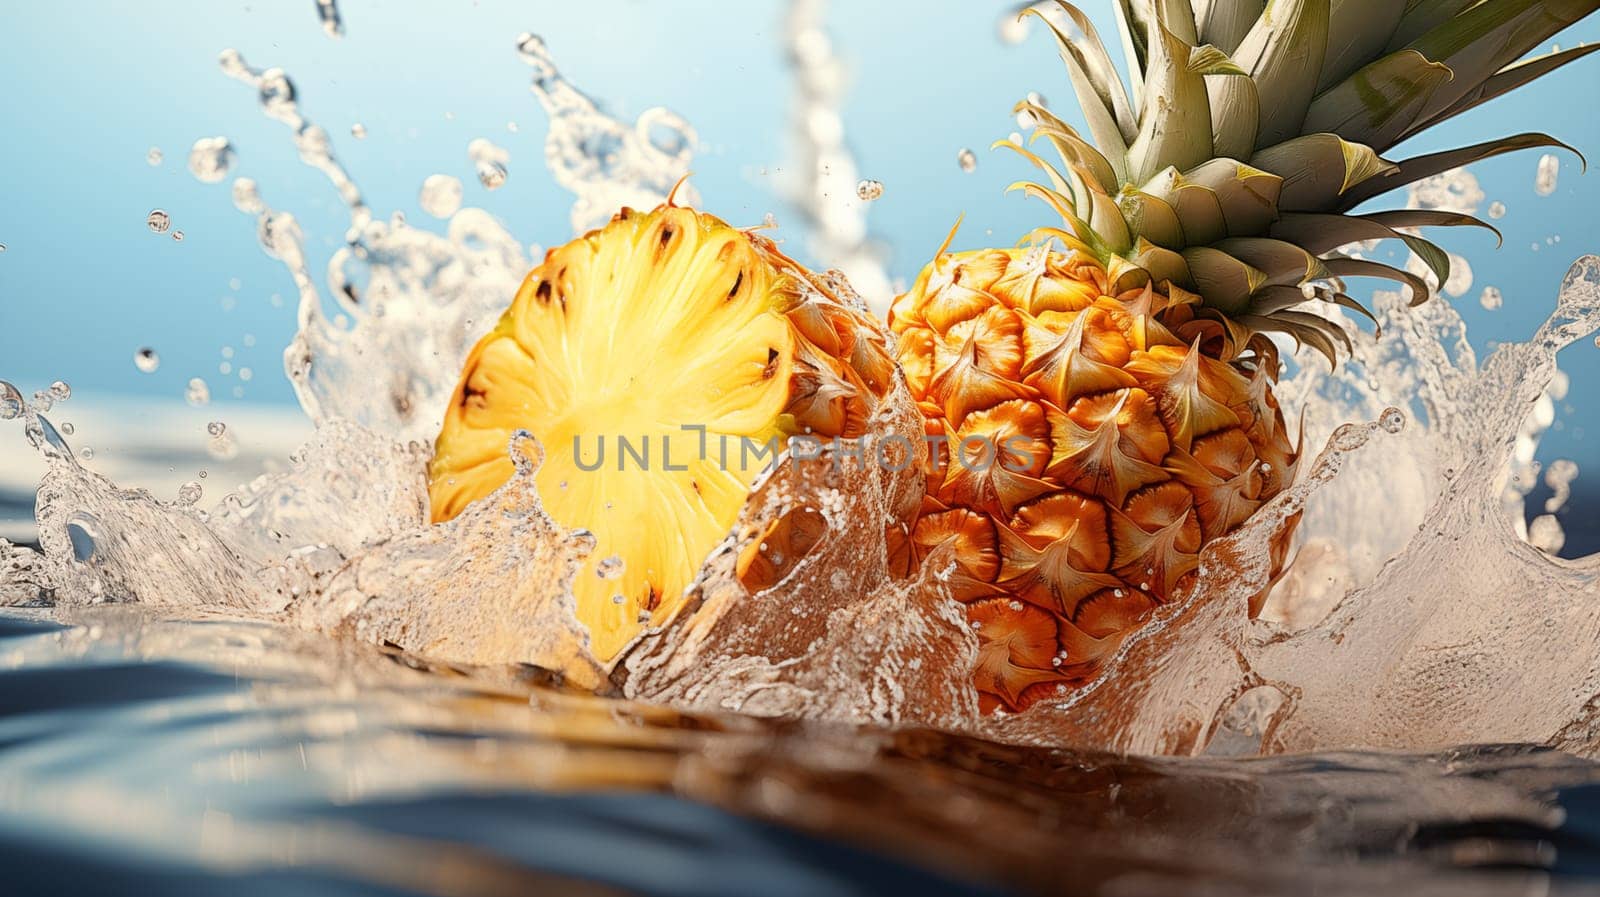 Beautiful fresh pineapple fall in blue water, with splashes and air bubbles by Zakharova